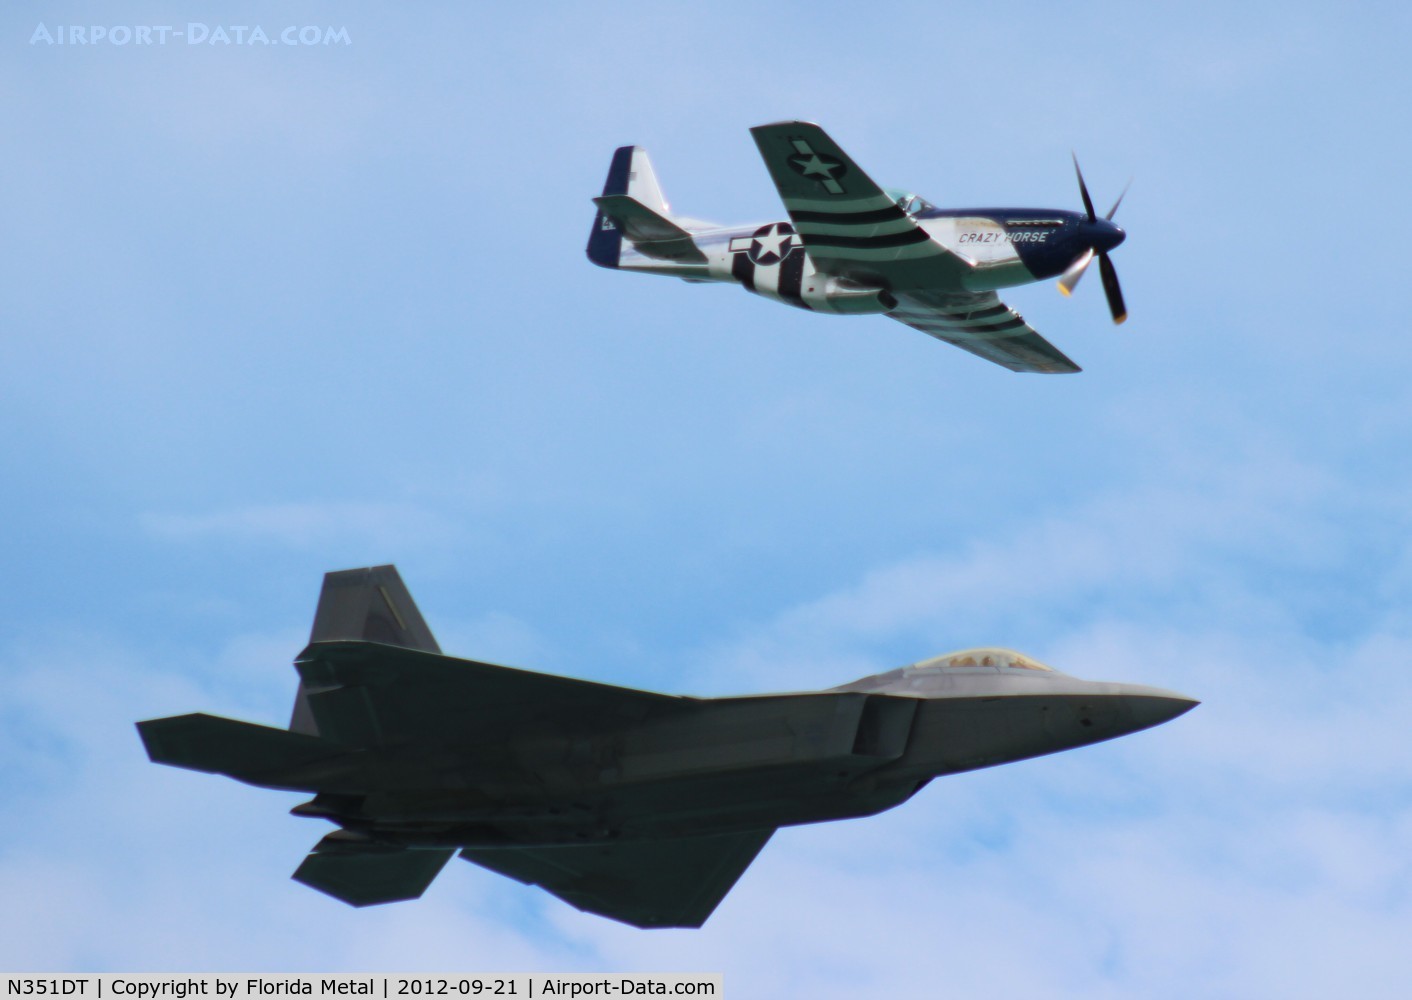 N351DT, 1944 North American P-51D Mustang C/N 122-41042, Crazy Horse 2 with F-22 over Cocoa Beach